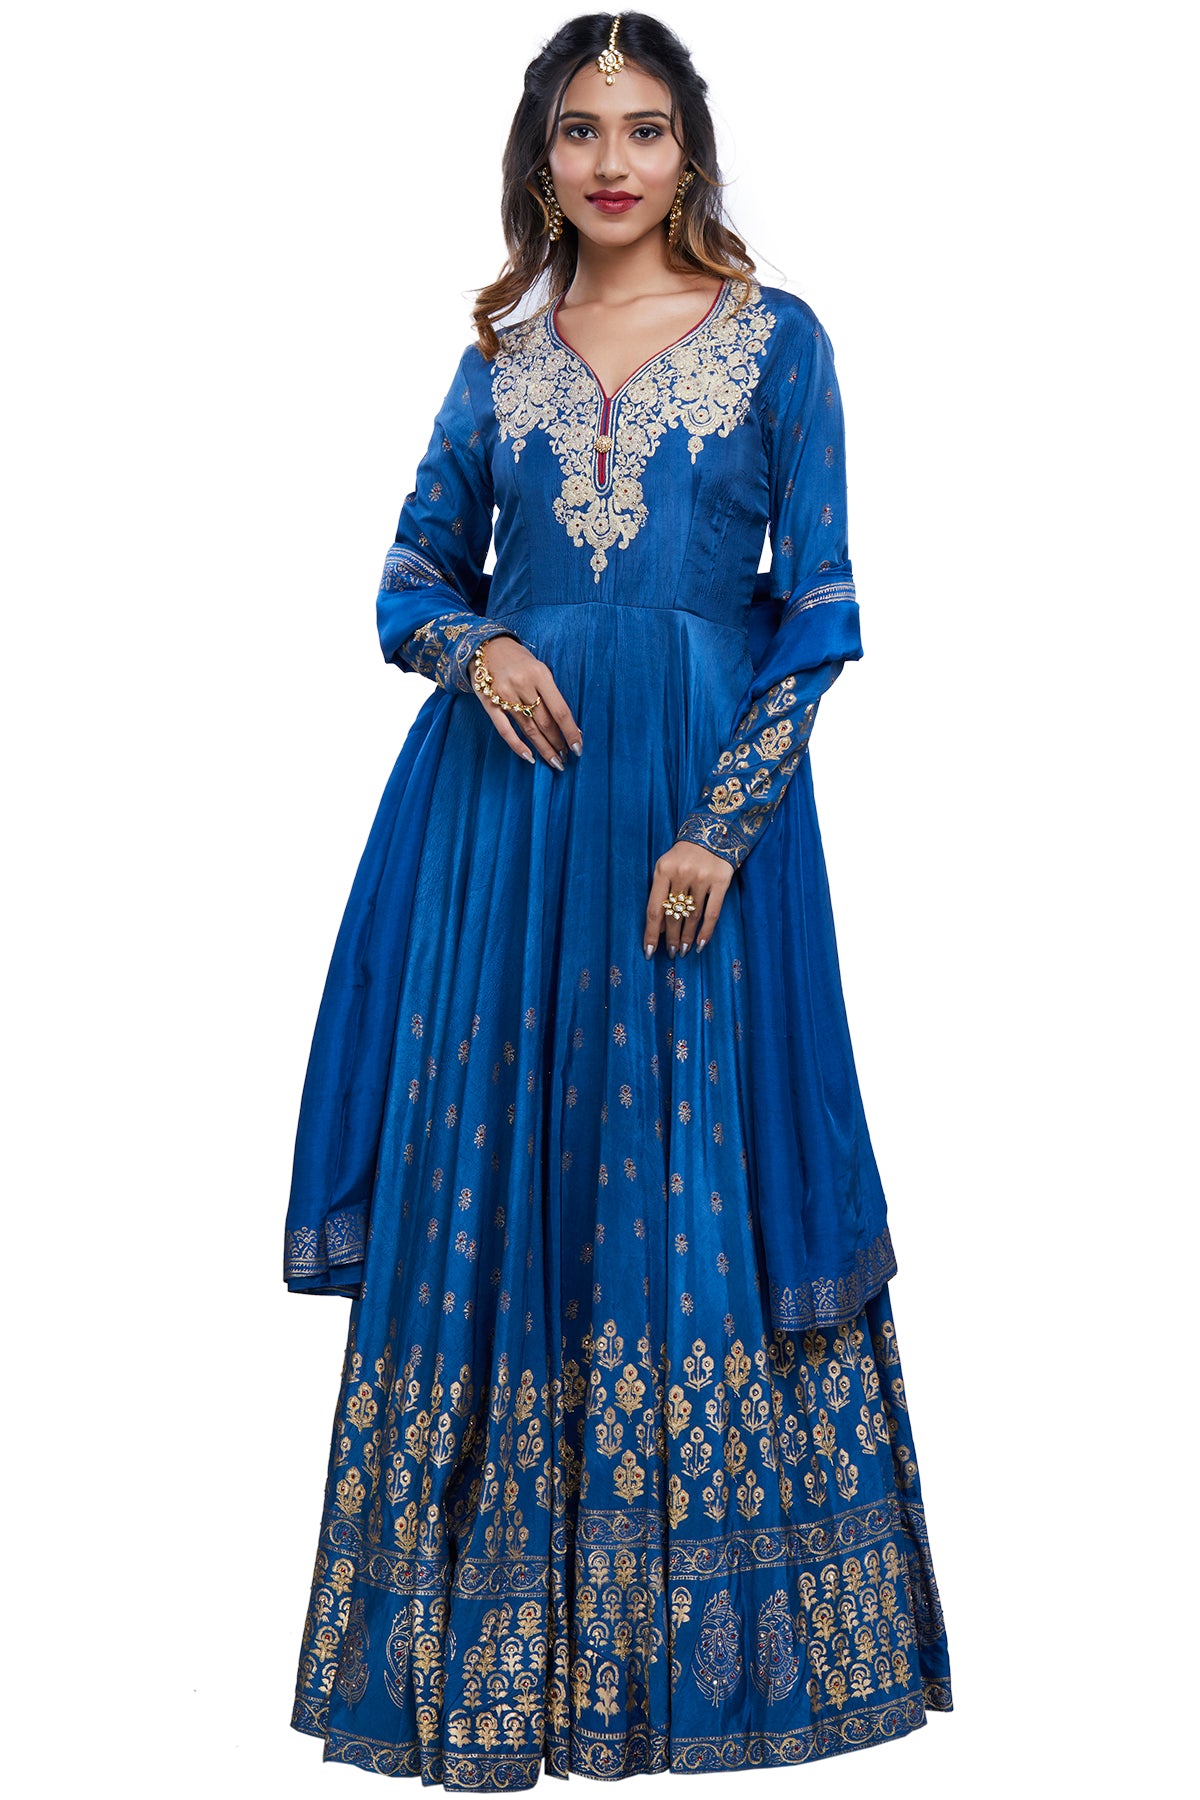 Mature and oh-so-tasteful, our classic blue anarkali gown with fold embellishments and a gold dupatta is truly one for the ages.